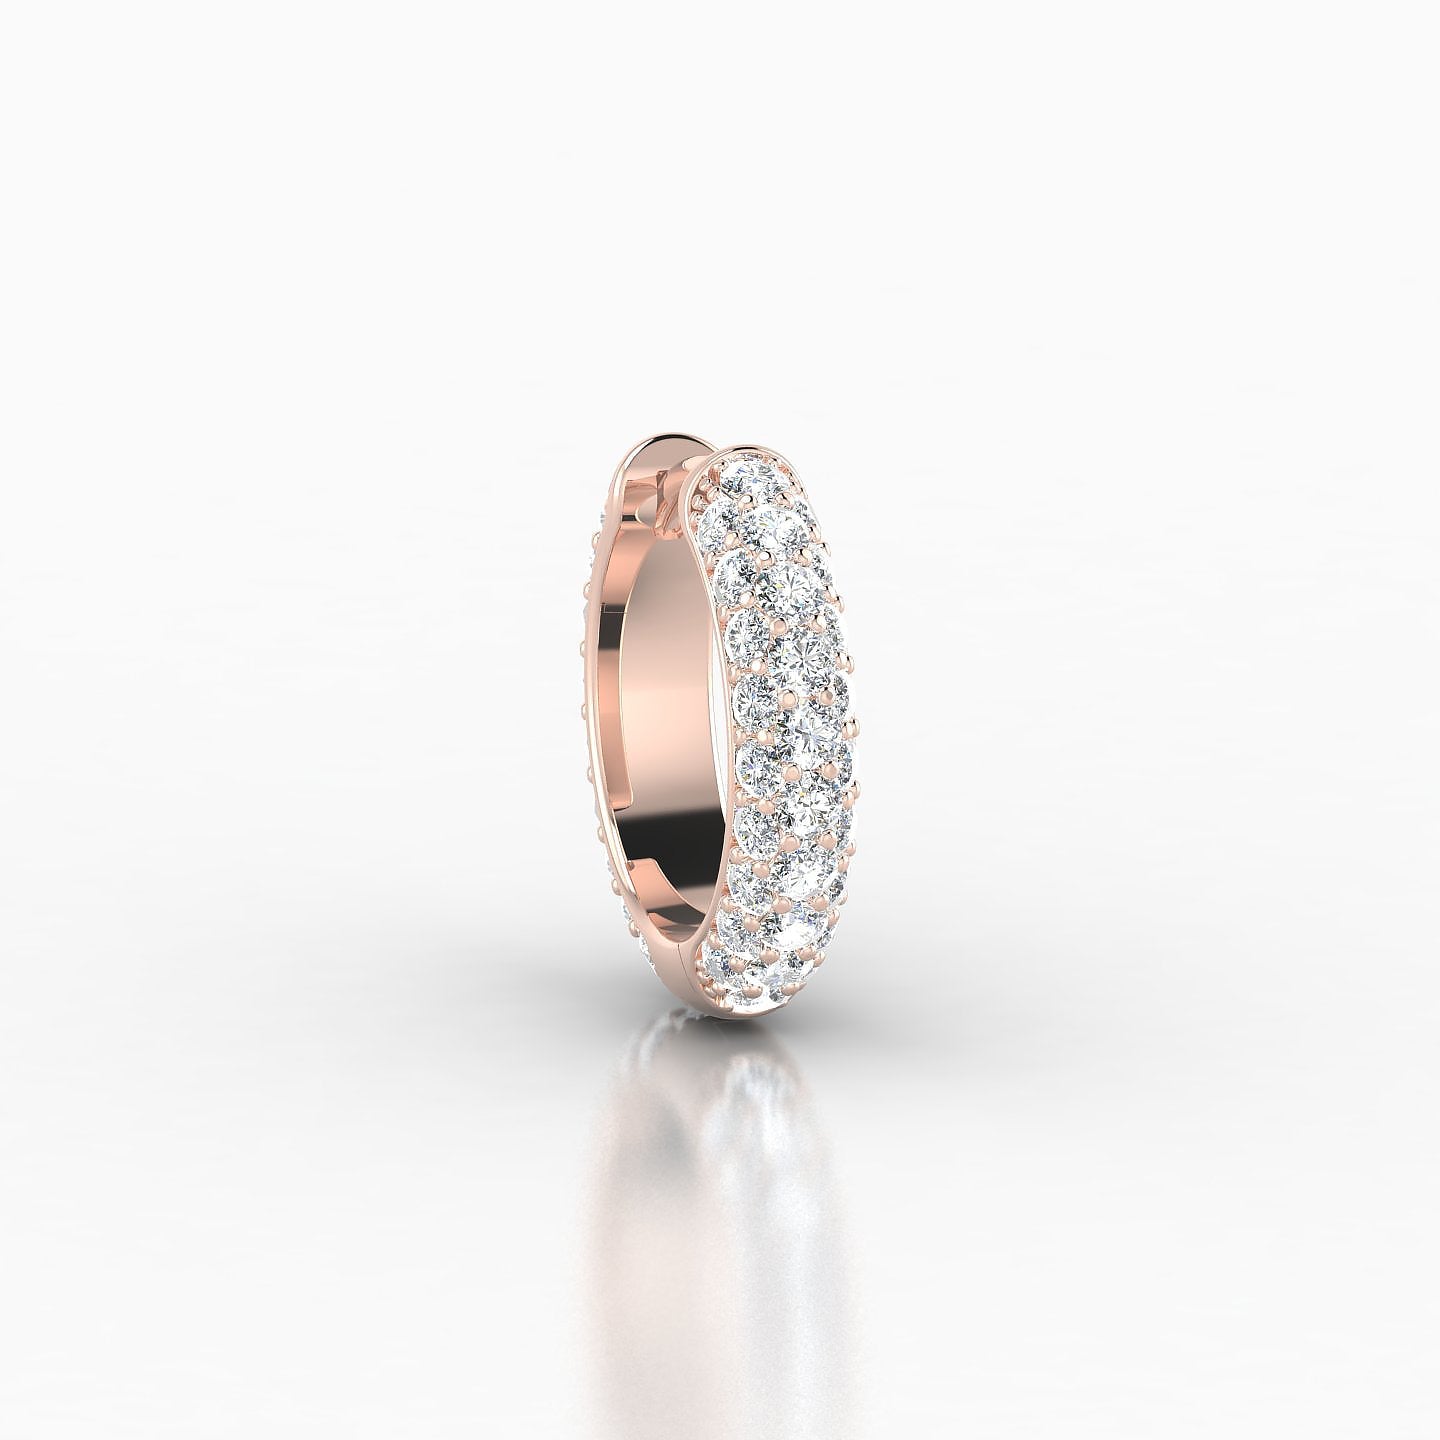 Theia | 18k Rose Gold 8 mm Pave Diamond Nose Ring Piercing